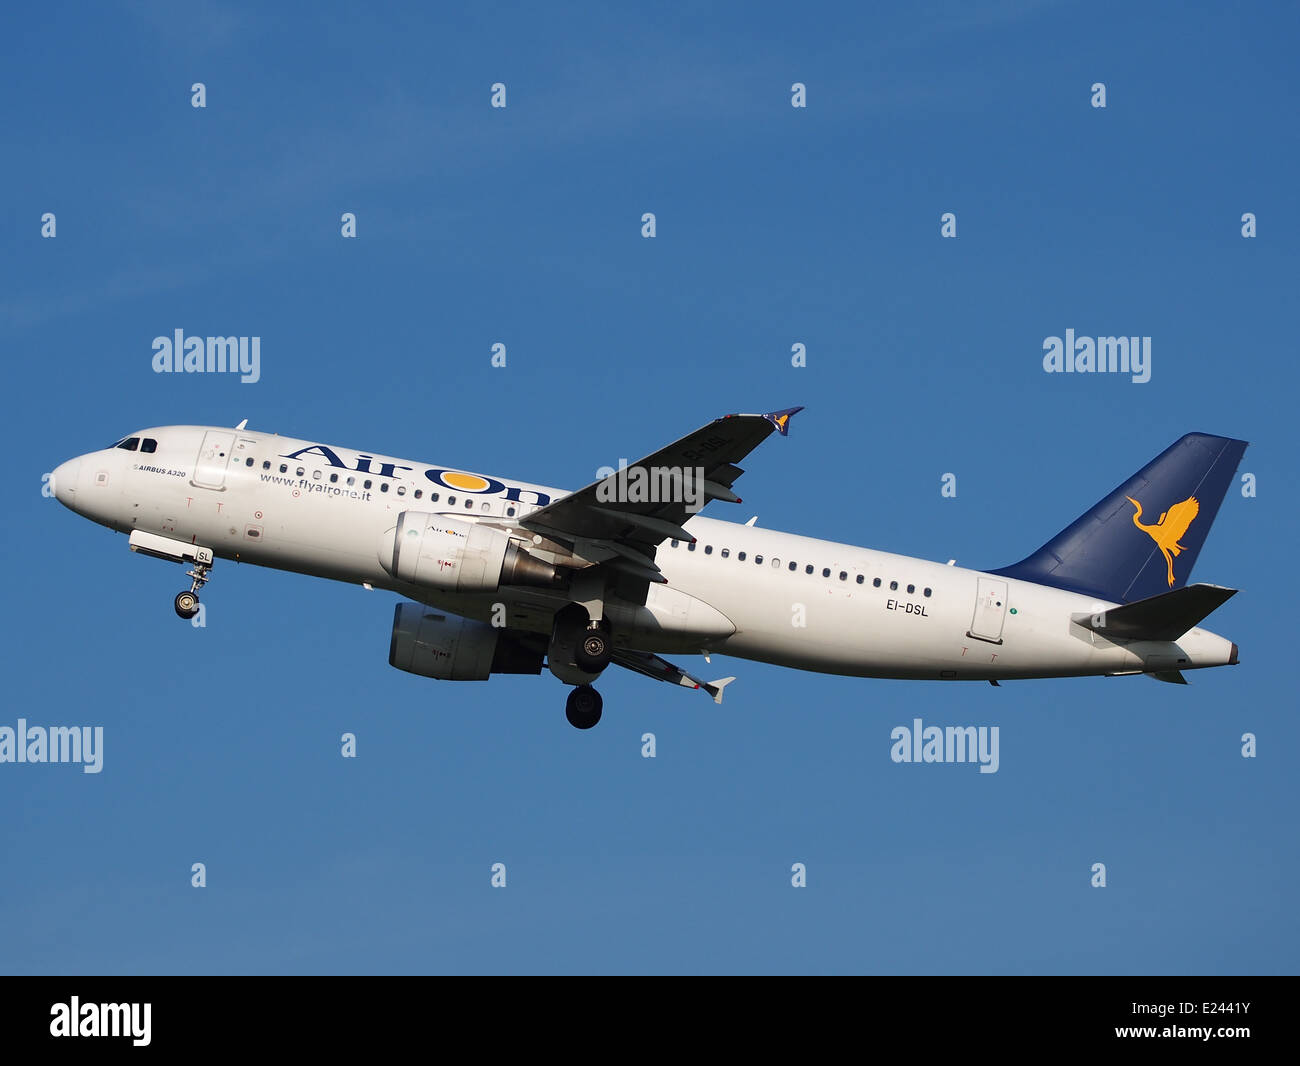 EI-DSL Air One, Airbus A320 takeoff from Schiphol (AMS - EHAM), The Netherlands, 17may2014, pic-3 Stock Photo